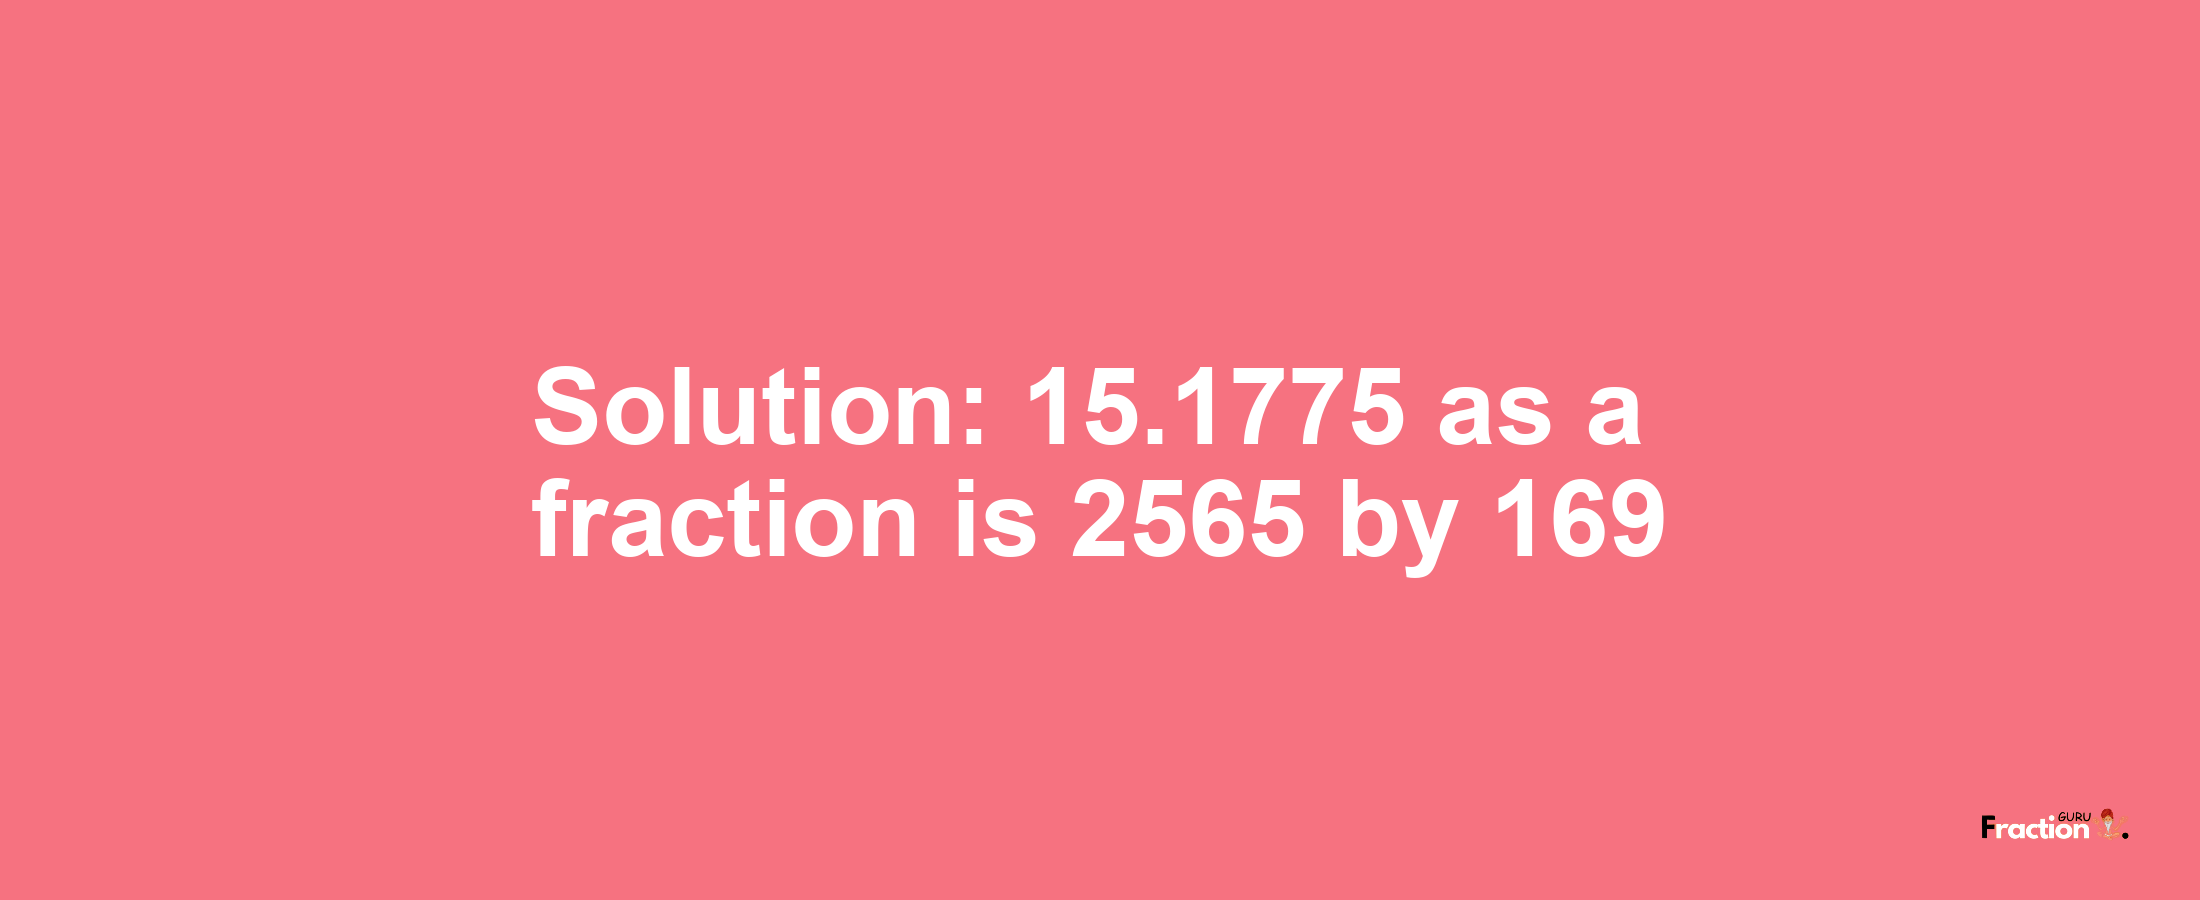 Solution:15.1775 as a fraction is 2565/169